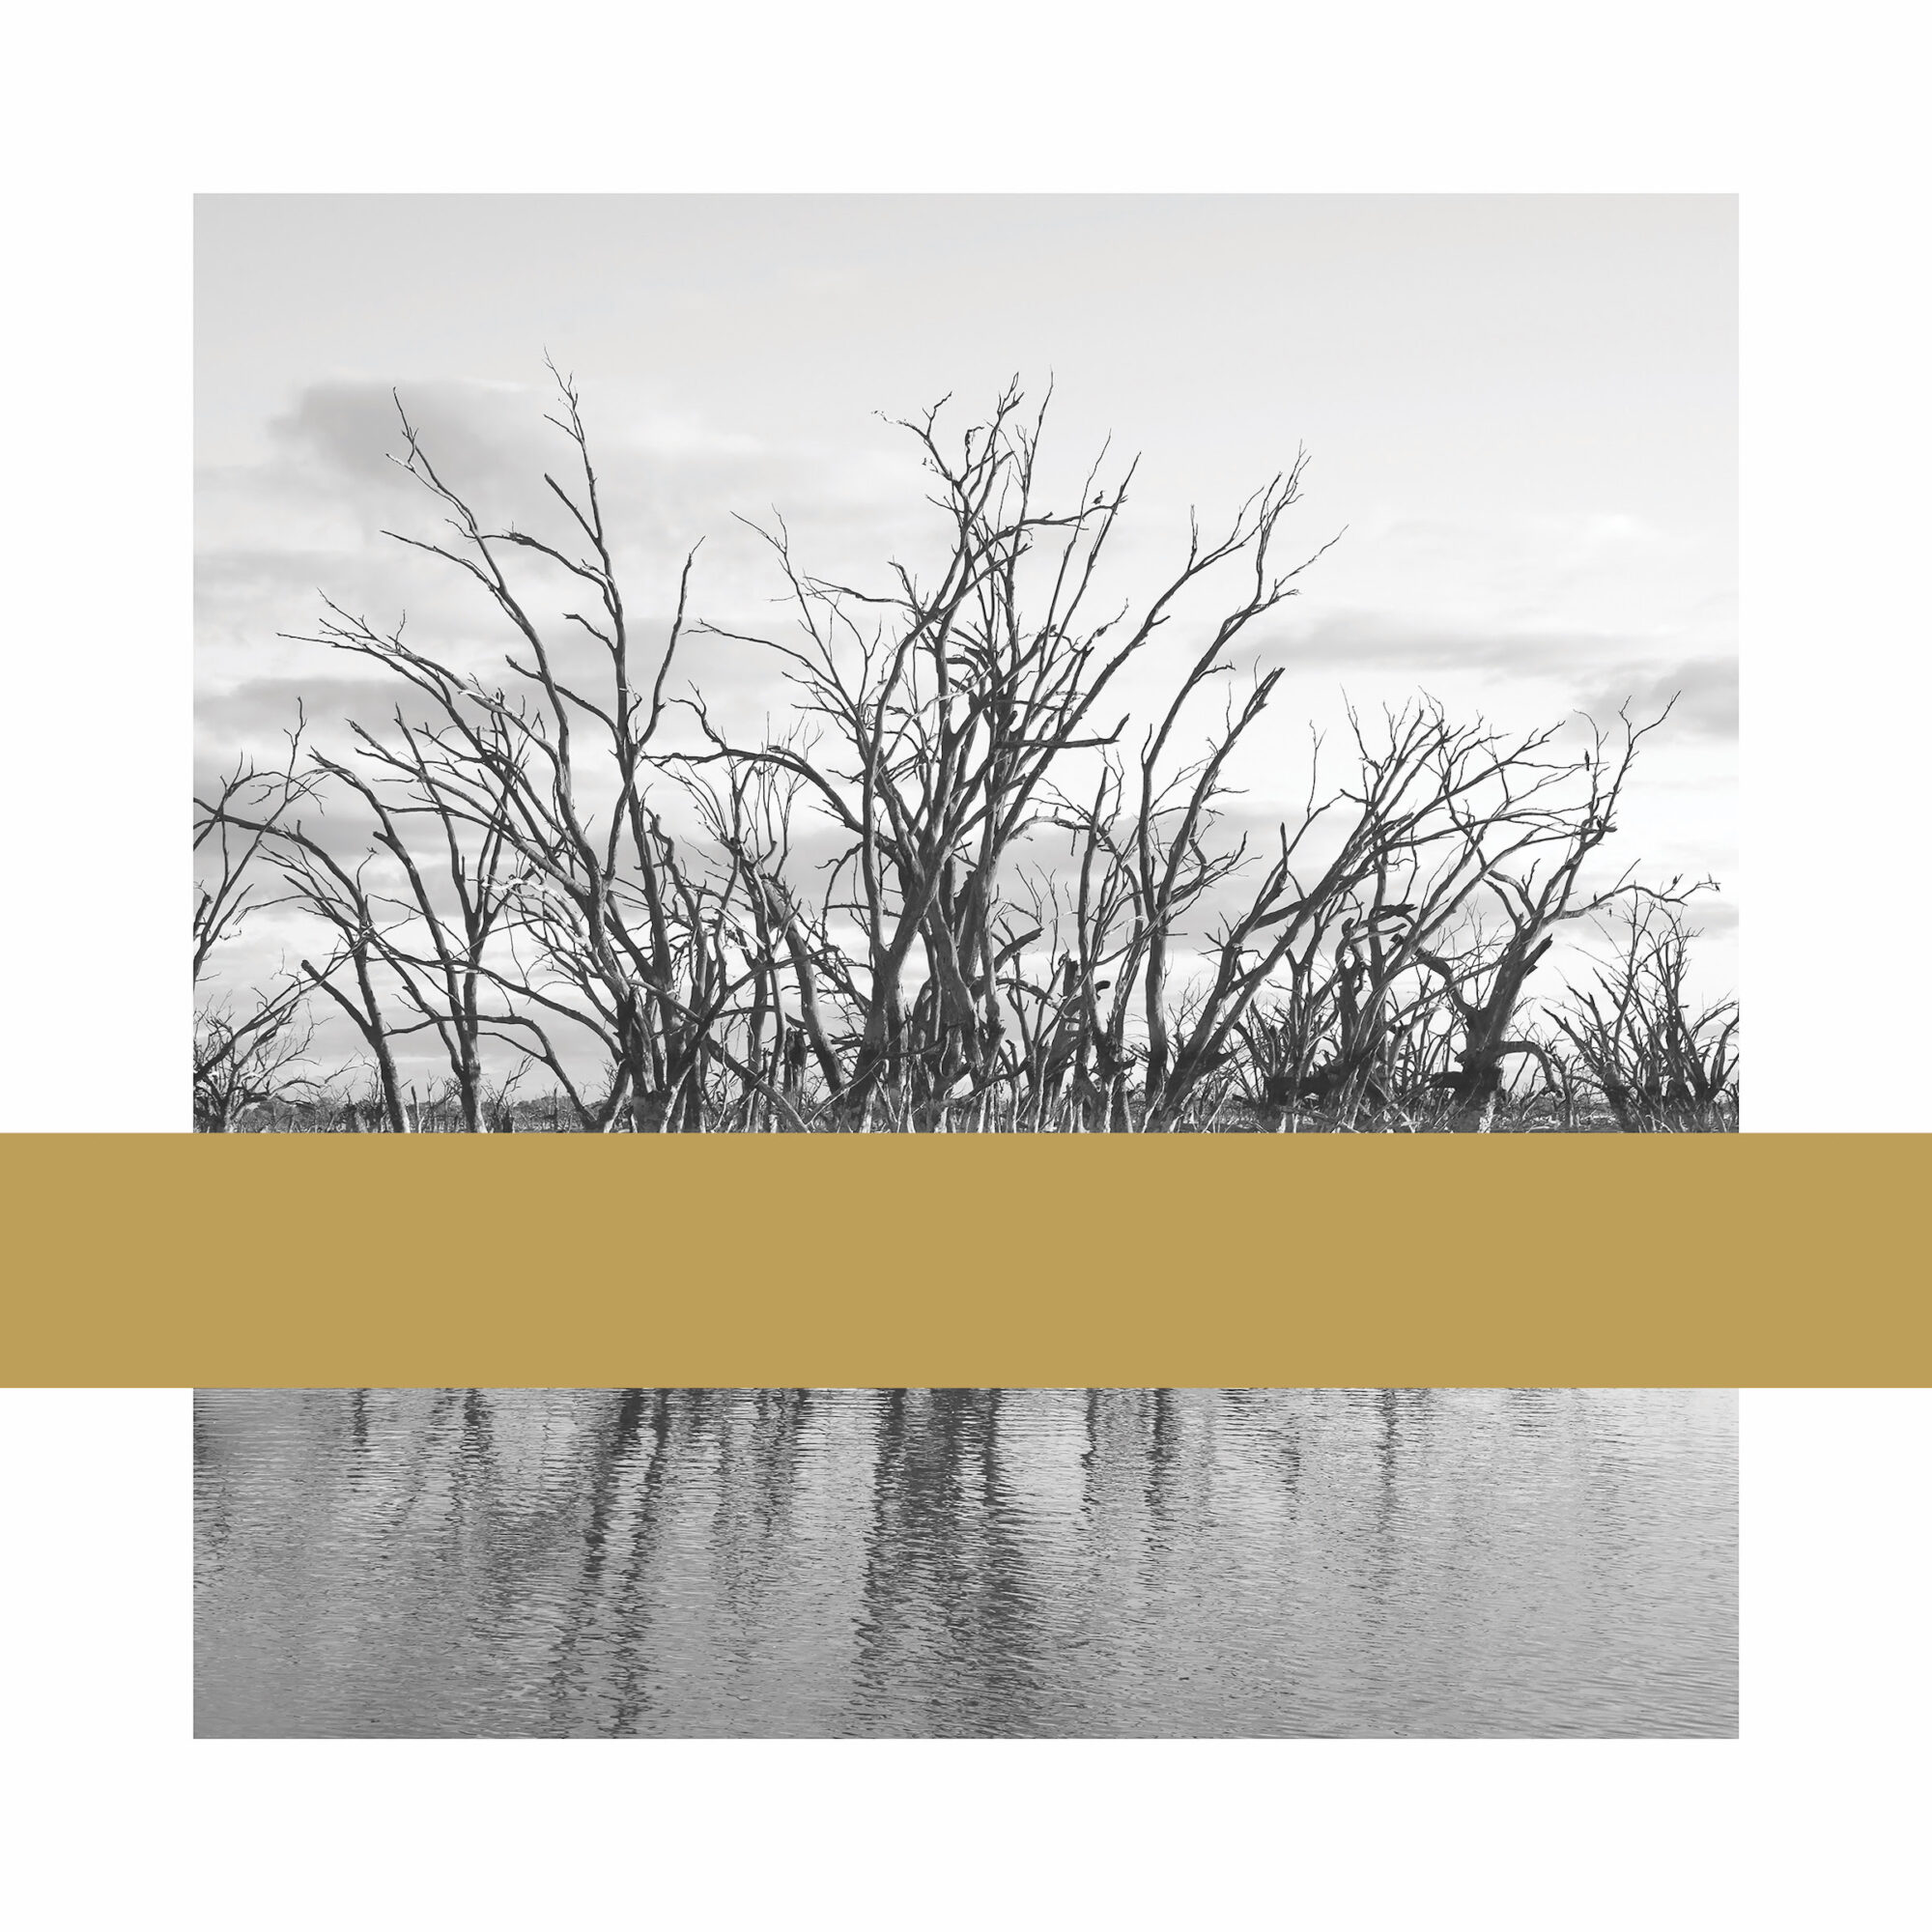 Black and white photograph of leafless trees emerging from a body of water, with a golden stripe overlaid across a section of the lower half of the image.